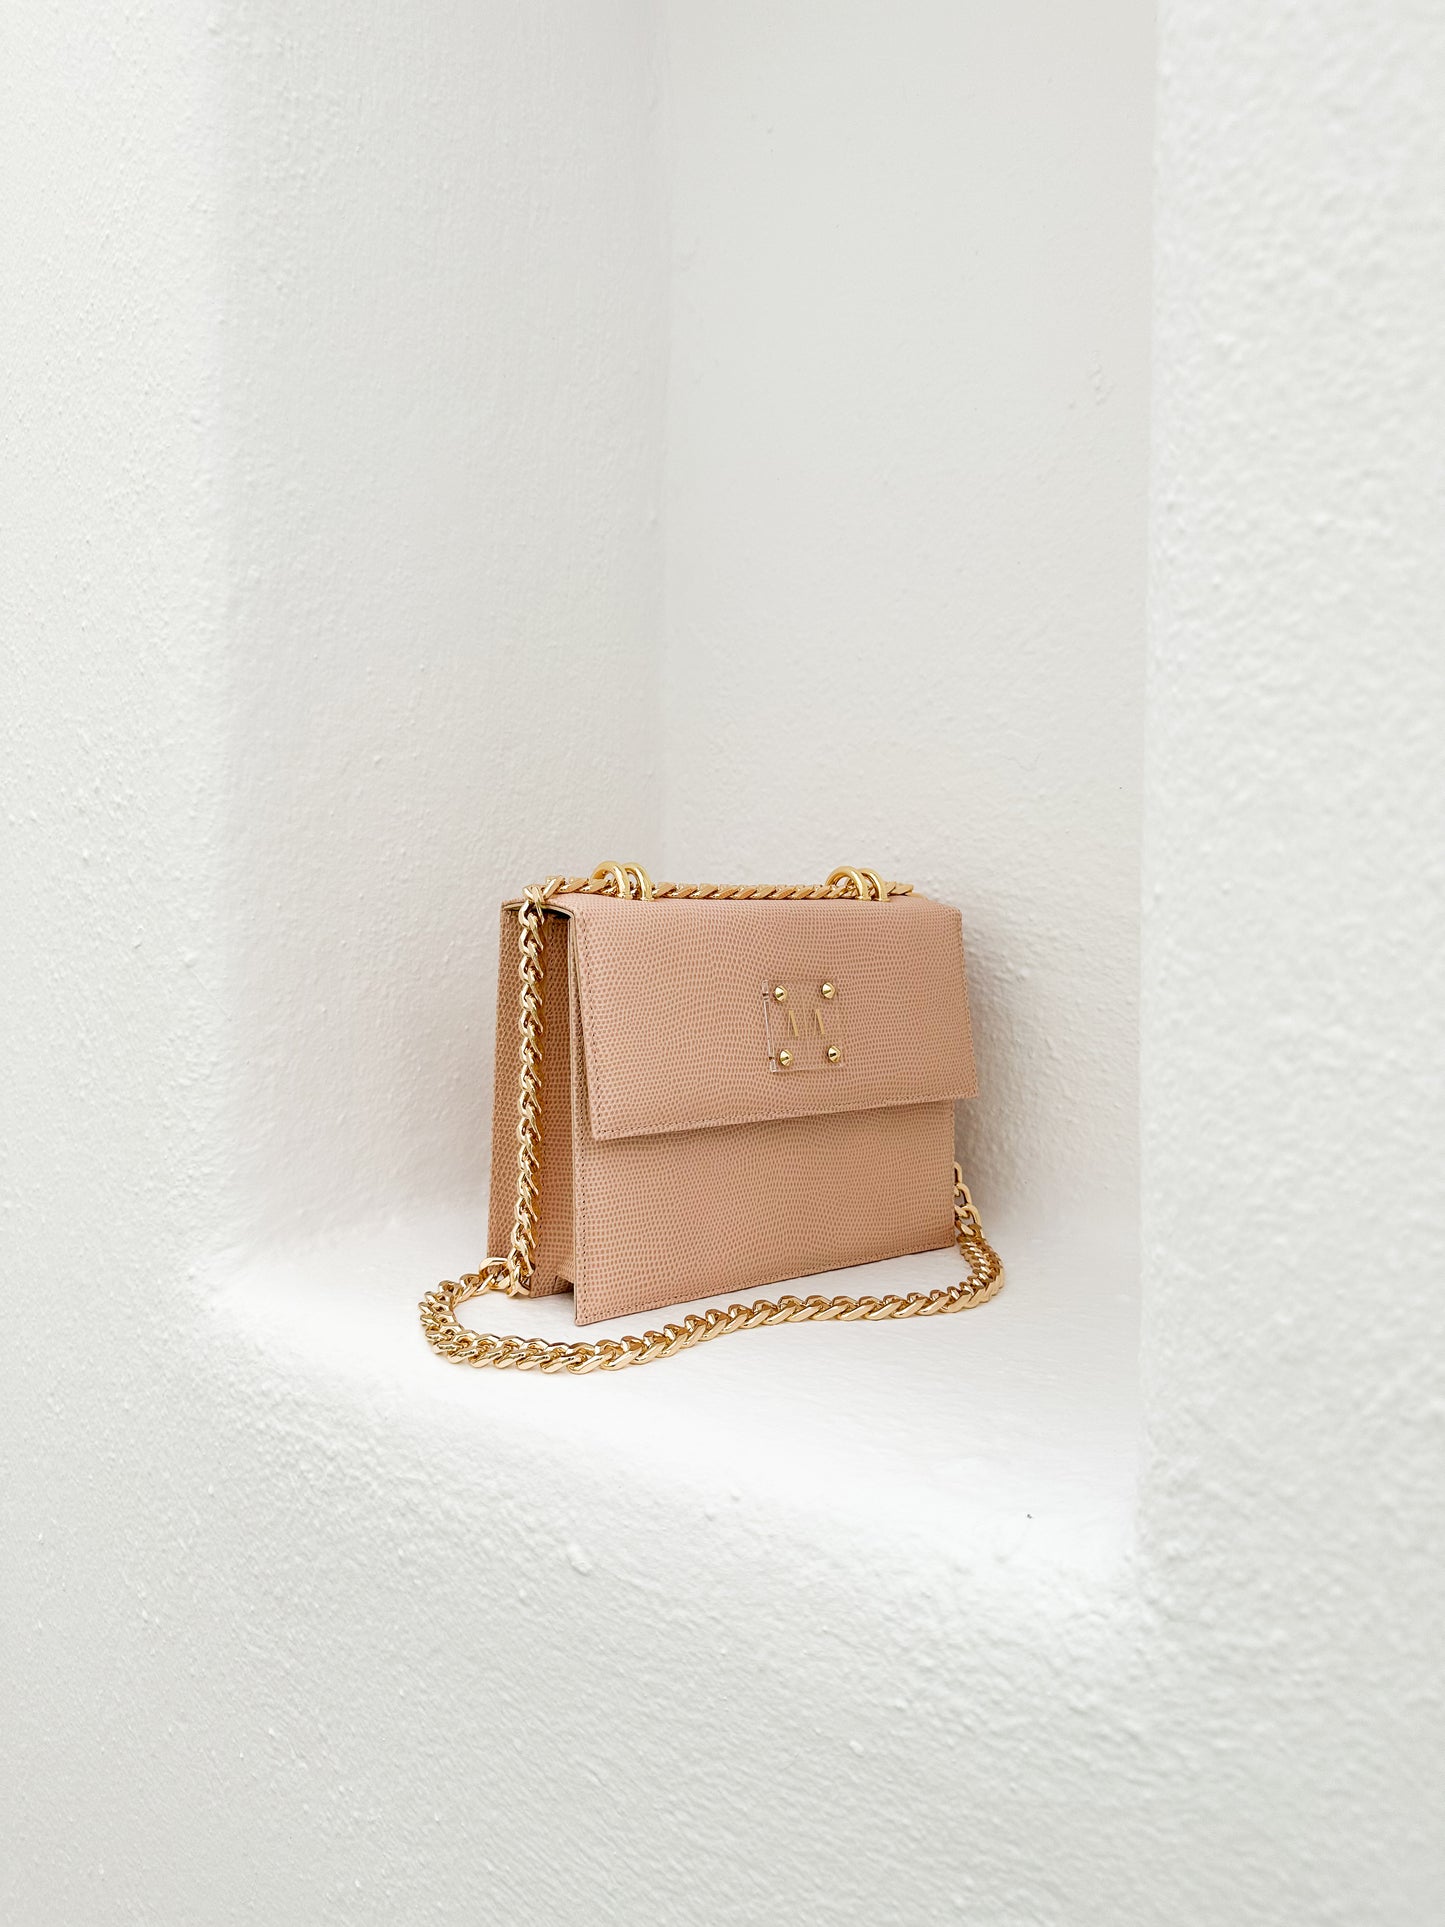 APRIL BAG  |  NUDE EMBOSSED LEATHER